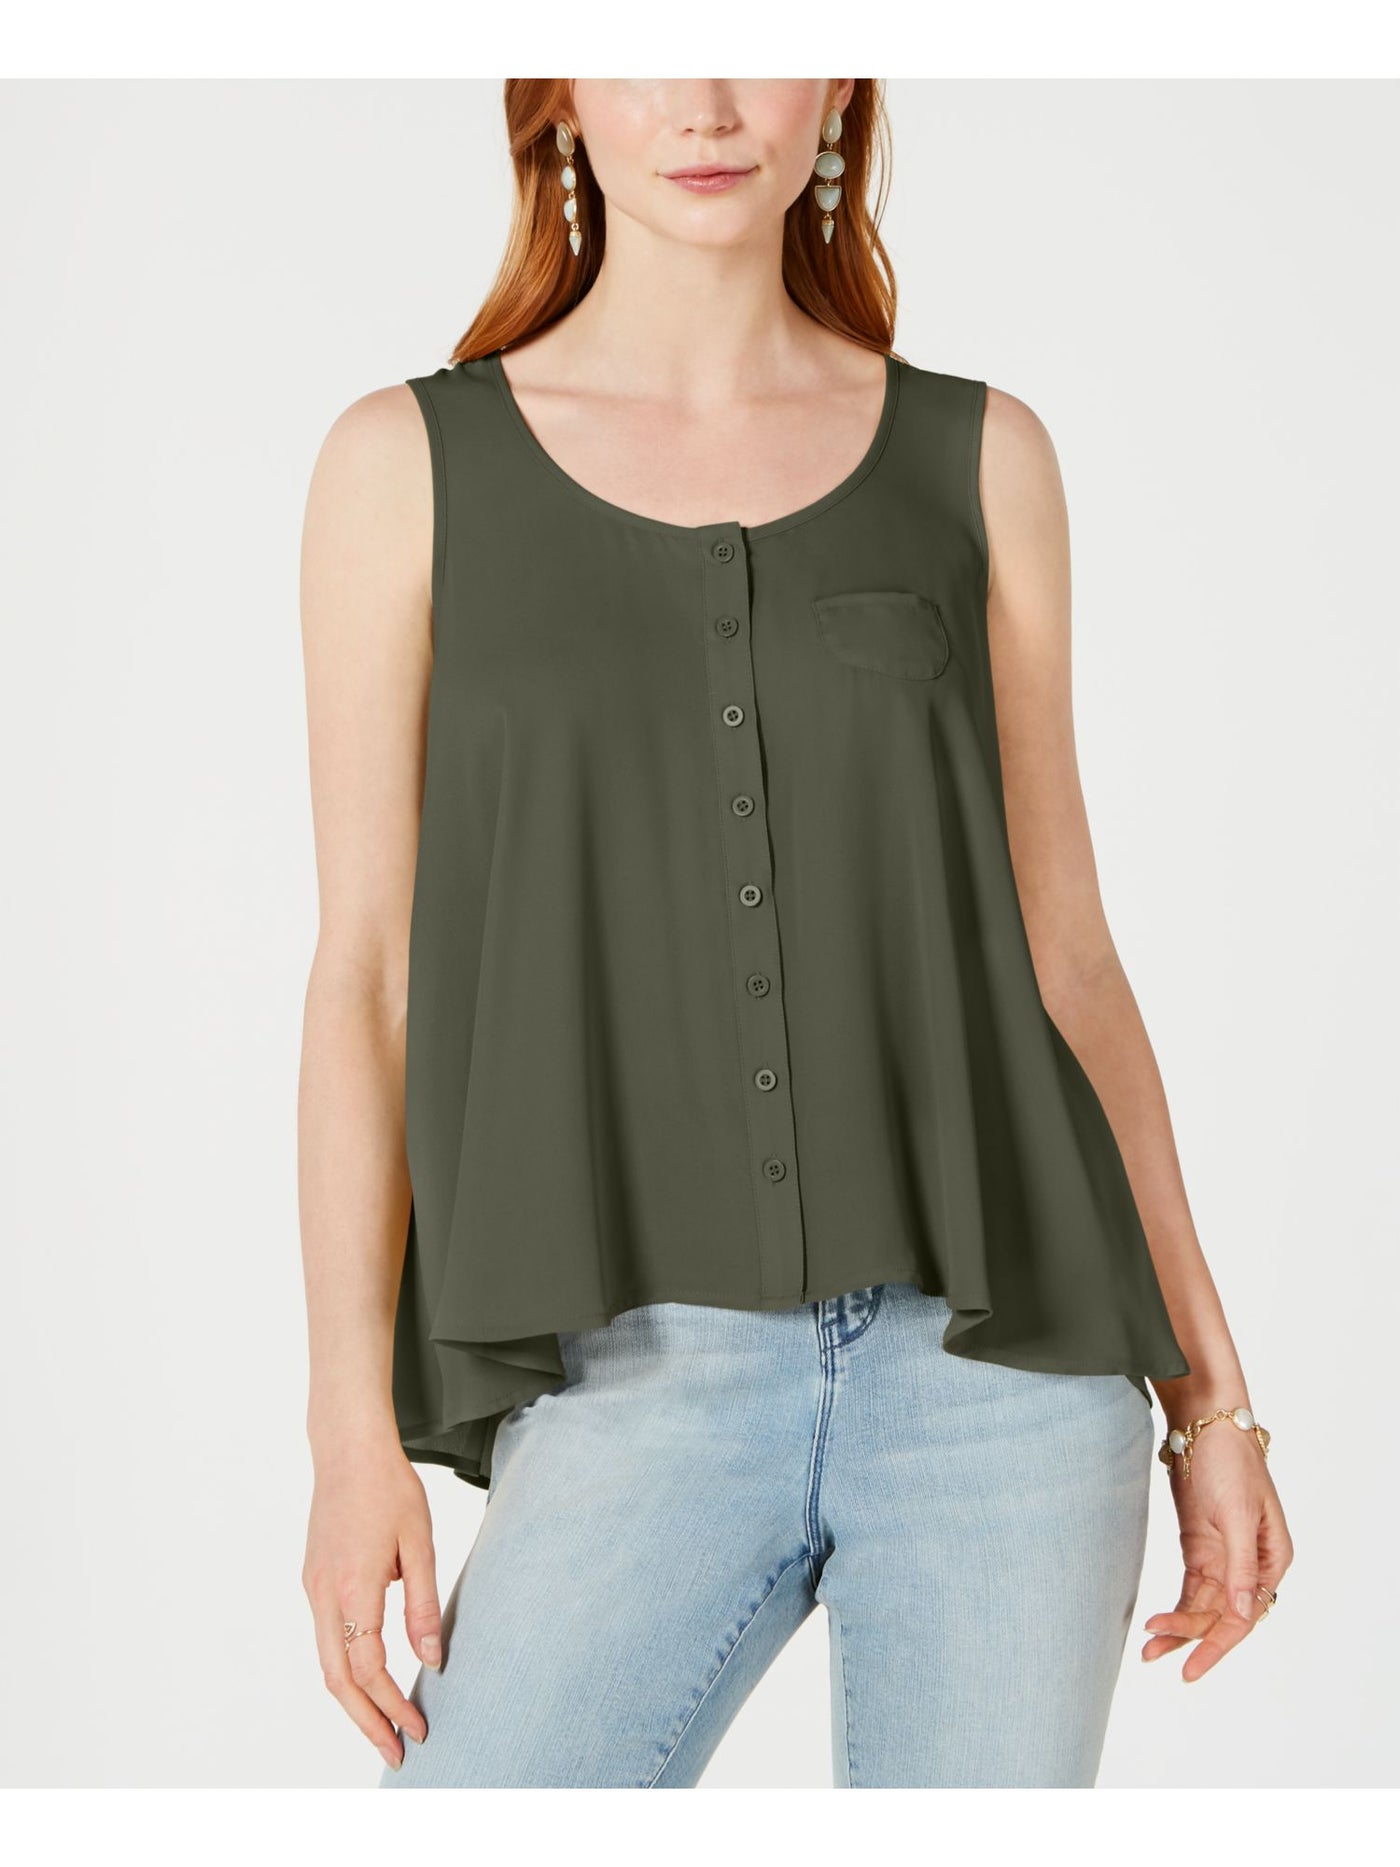 STYLE & COMPANY Womens Green Swing Sleeveless Scoop Neck Cocktail Blouse S